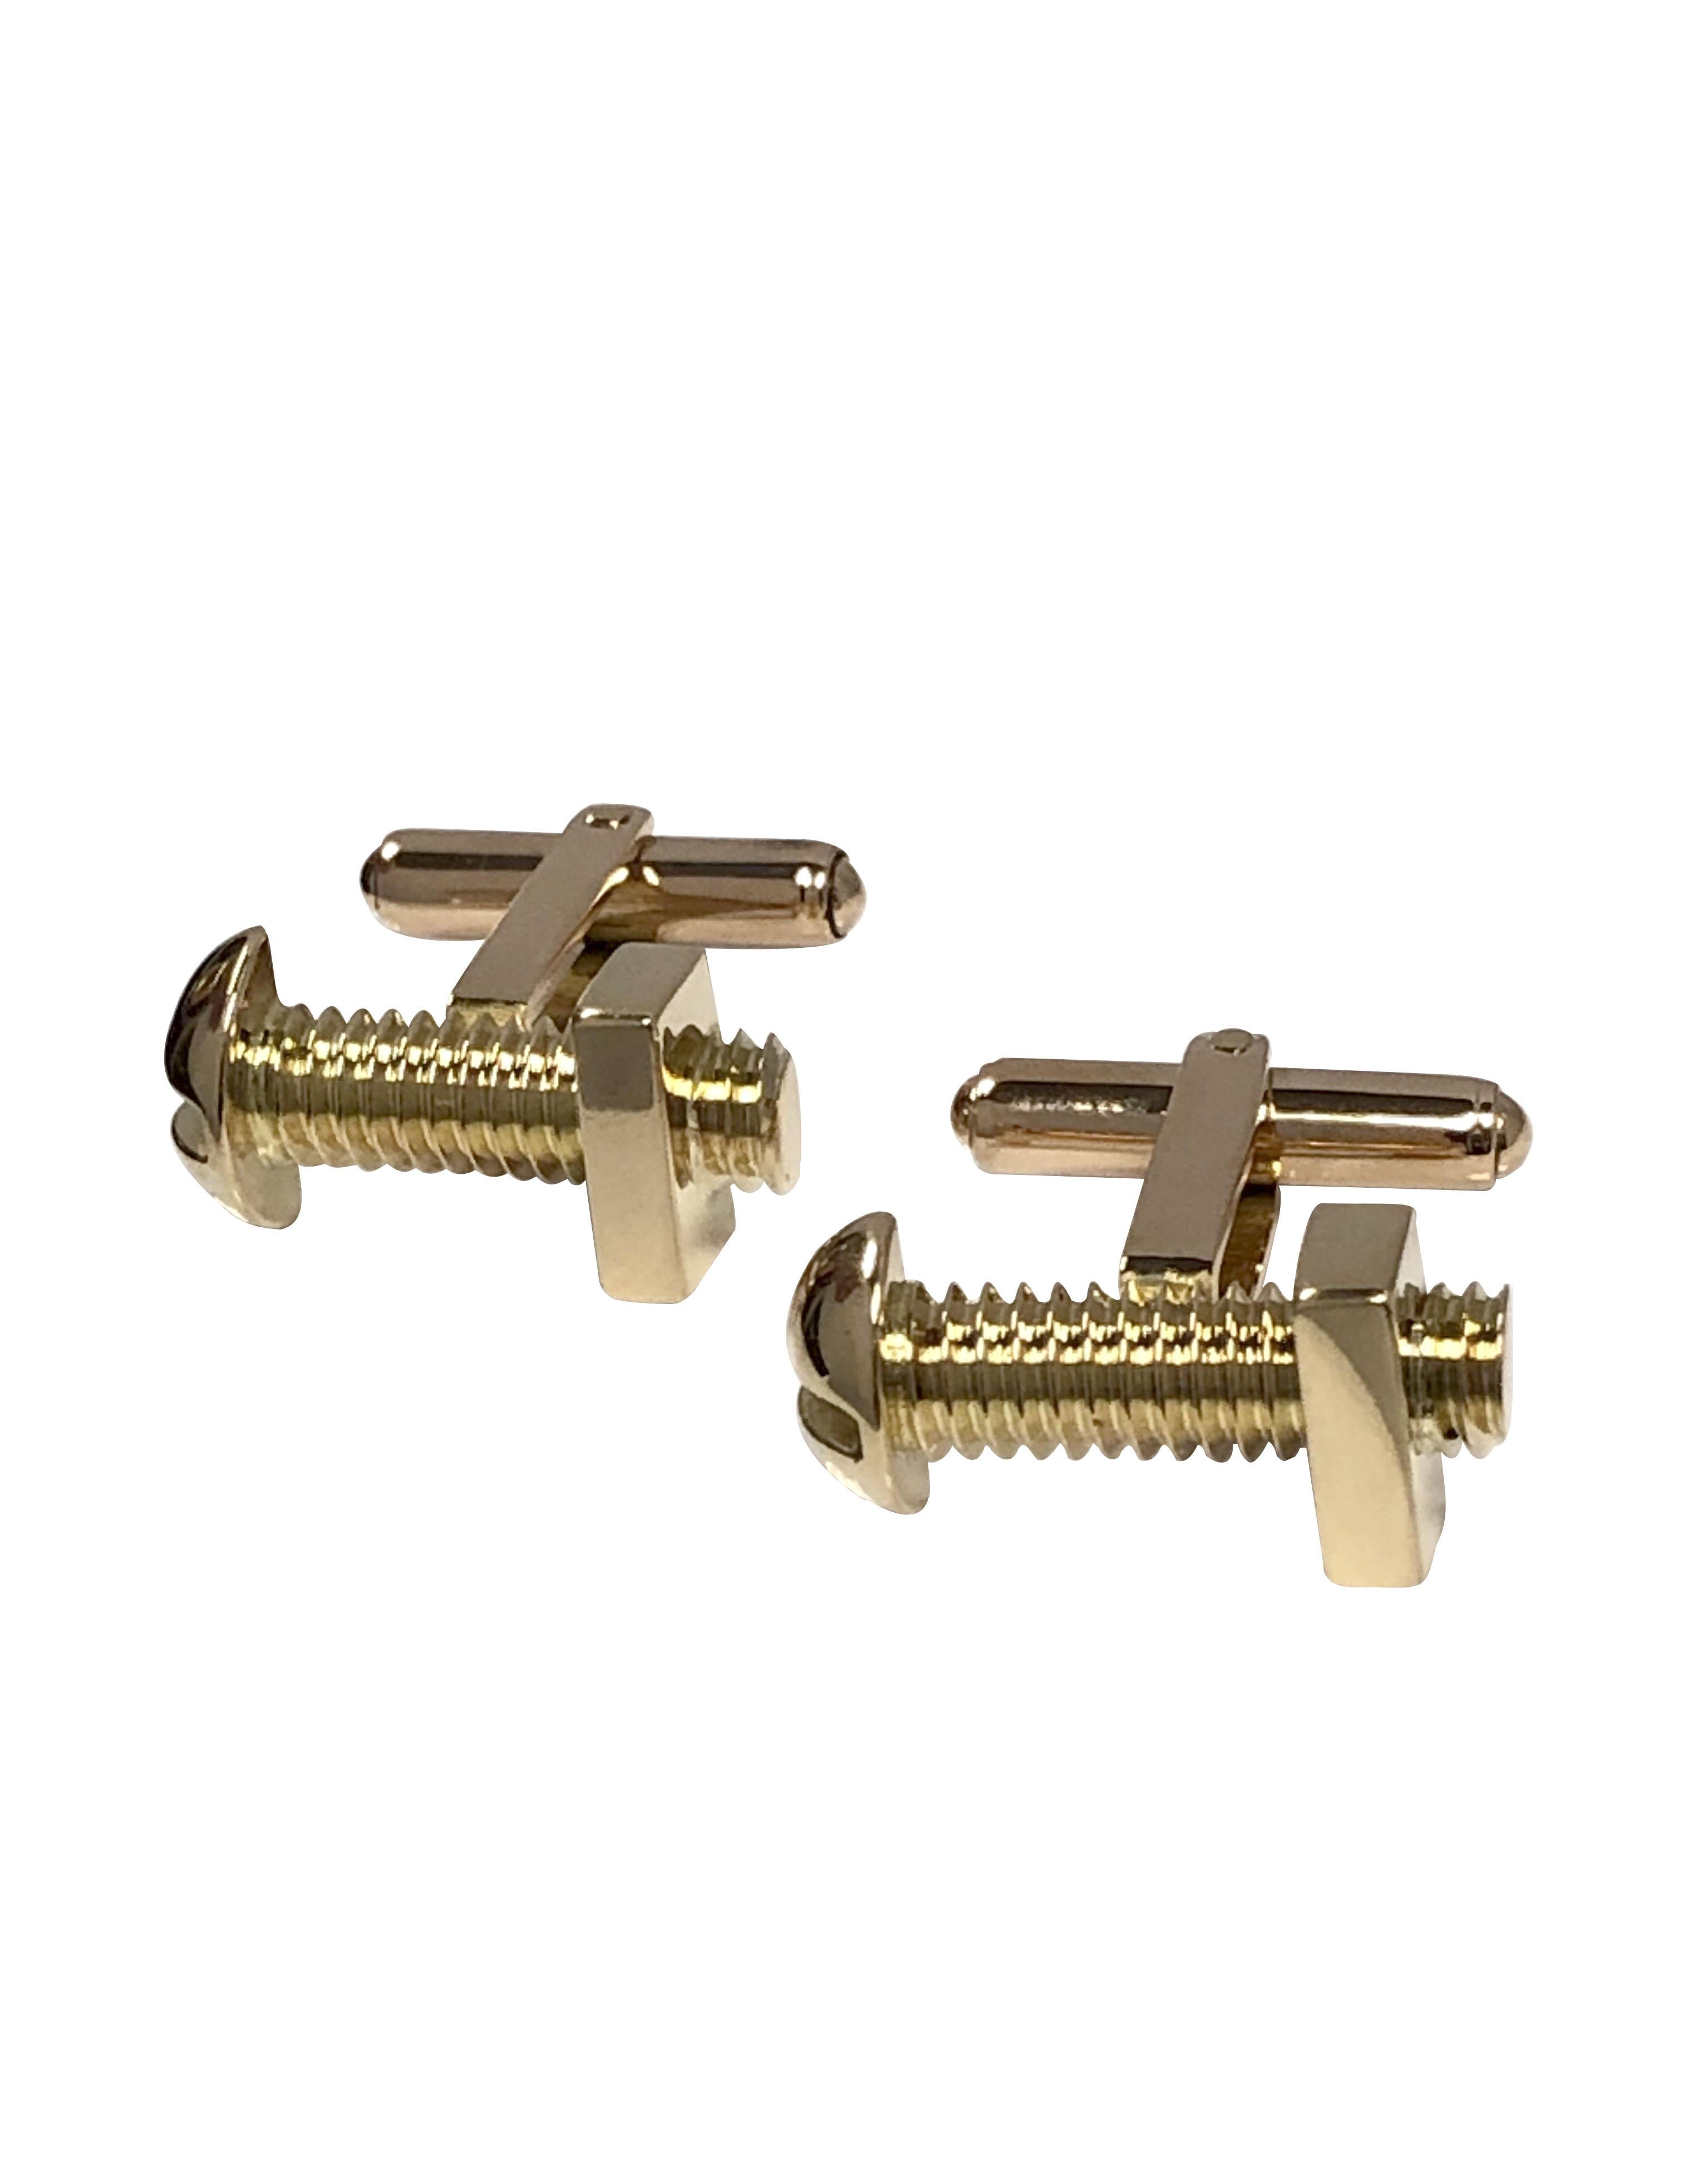 Circa 1980 14k Yellow Gold Nut and Bolt Design Cufflinks, mesurant 7/8 inch in length and 3/8 inch wide, extremely well made with perfect detail, nice solid construction and weighing 15.6 Grams. Les dos sont munis d'un bouton à bascule pour